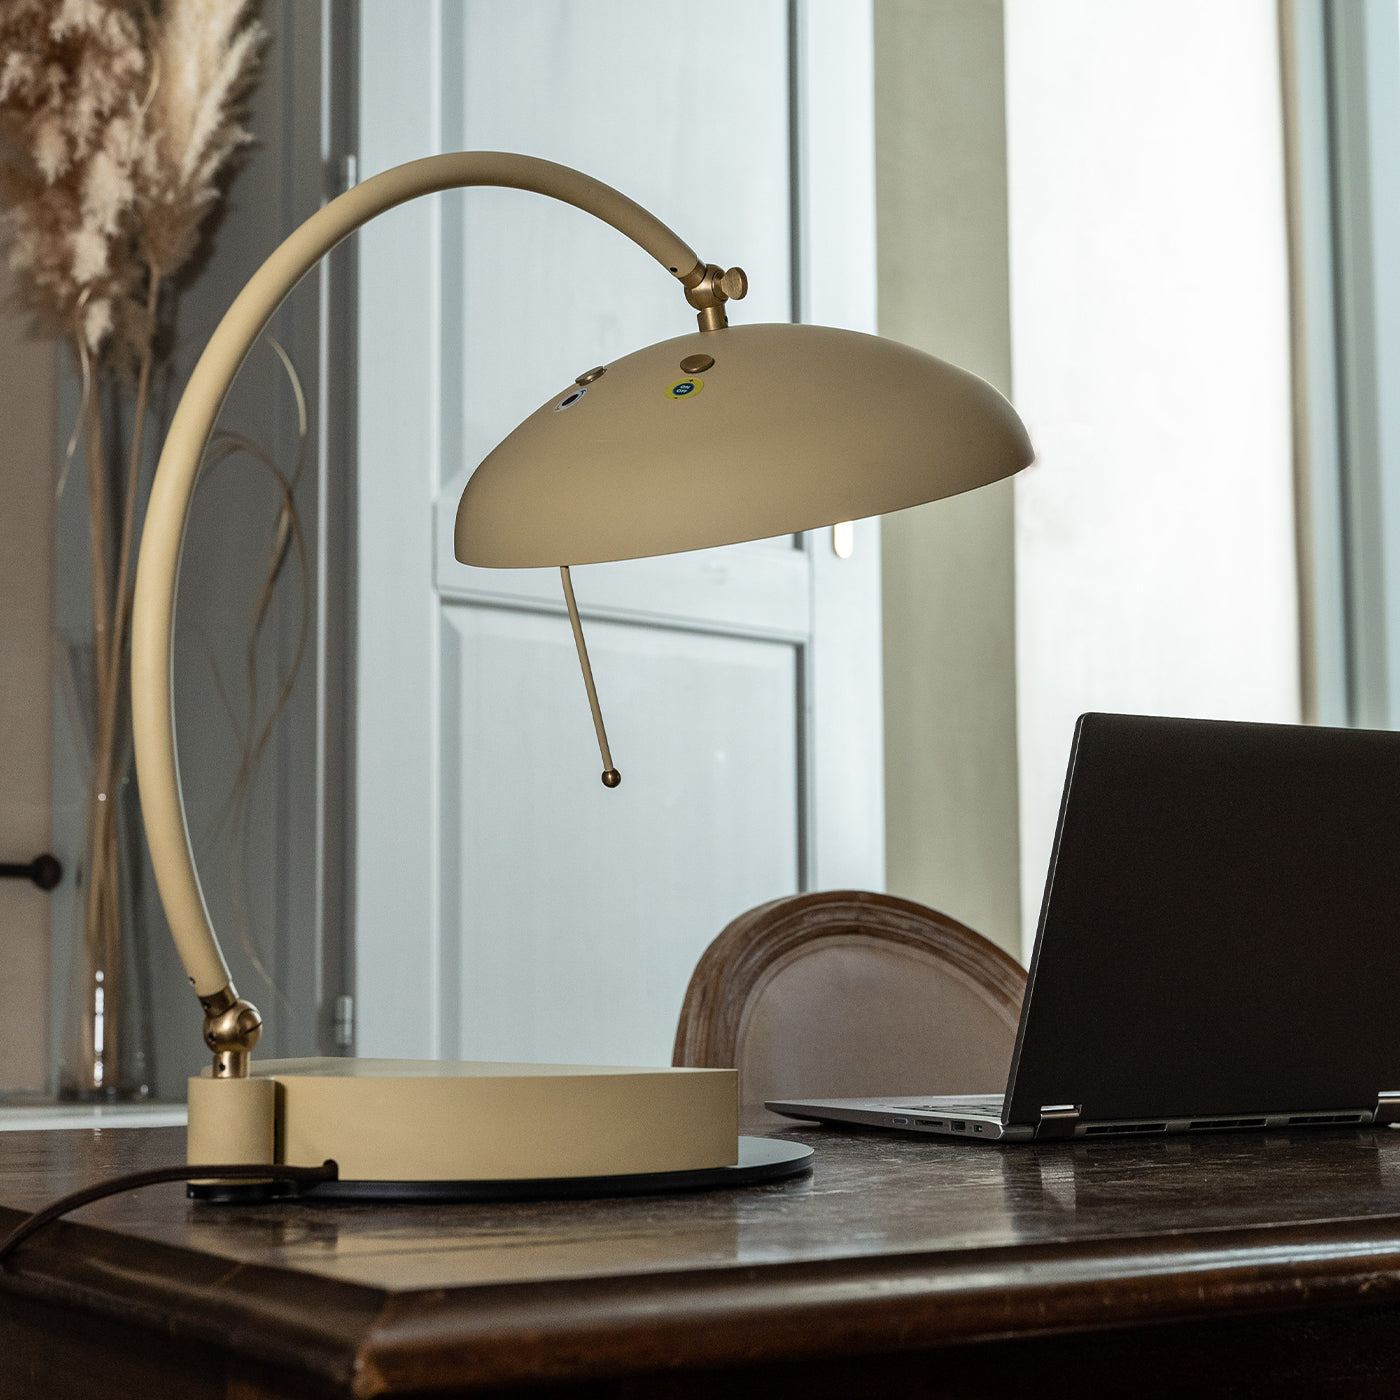 Serena Ministeriale Yellow Table Lamp - Alternative view 2